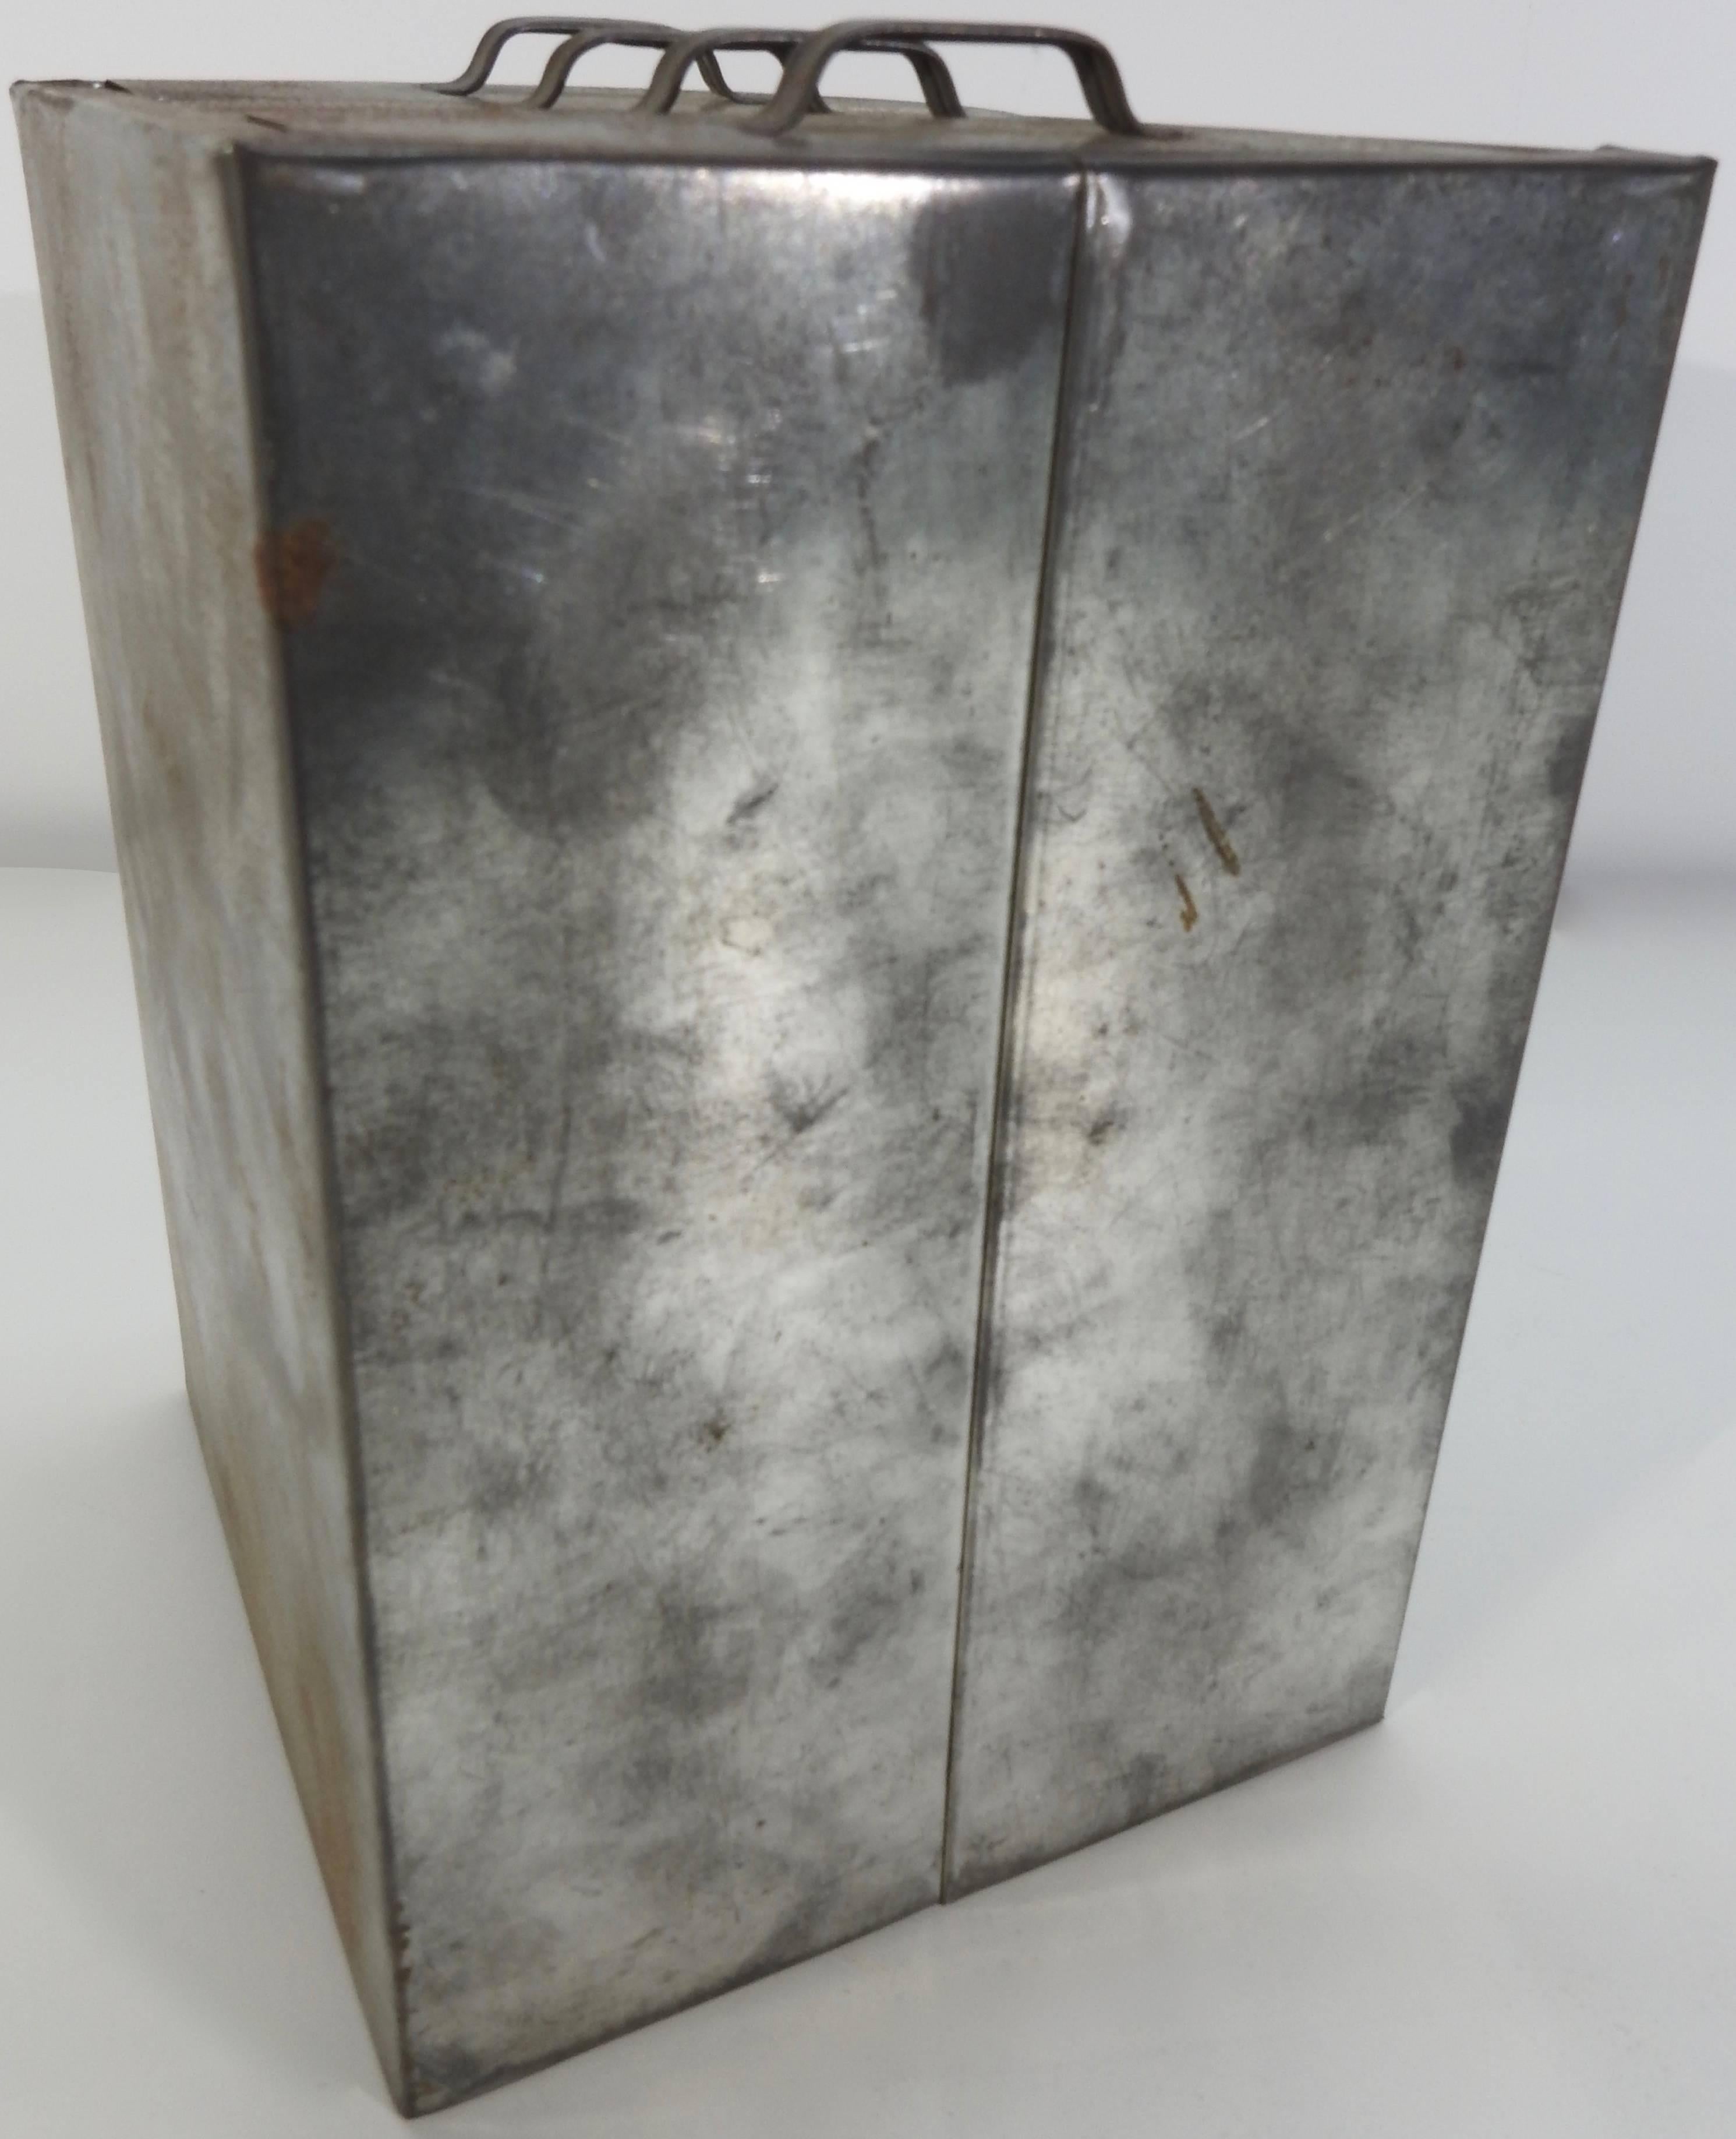 Steel Industrial Metal Box with Drawers Midcentury For Sale